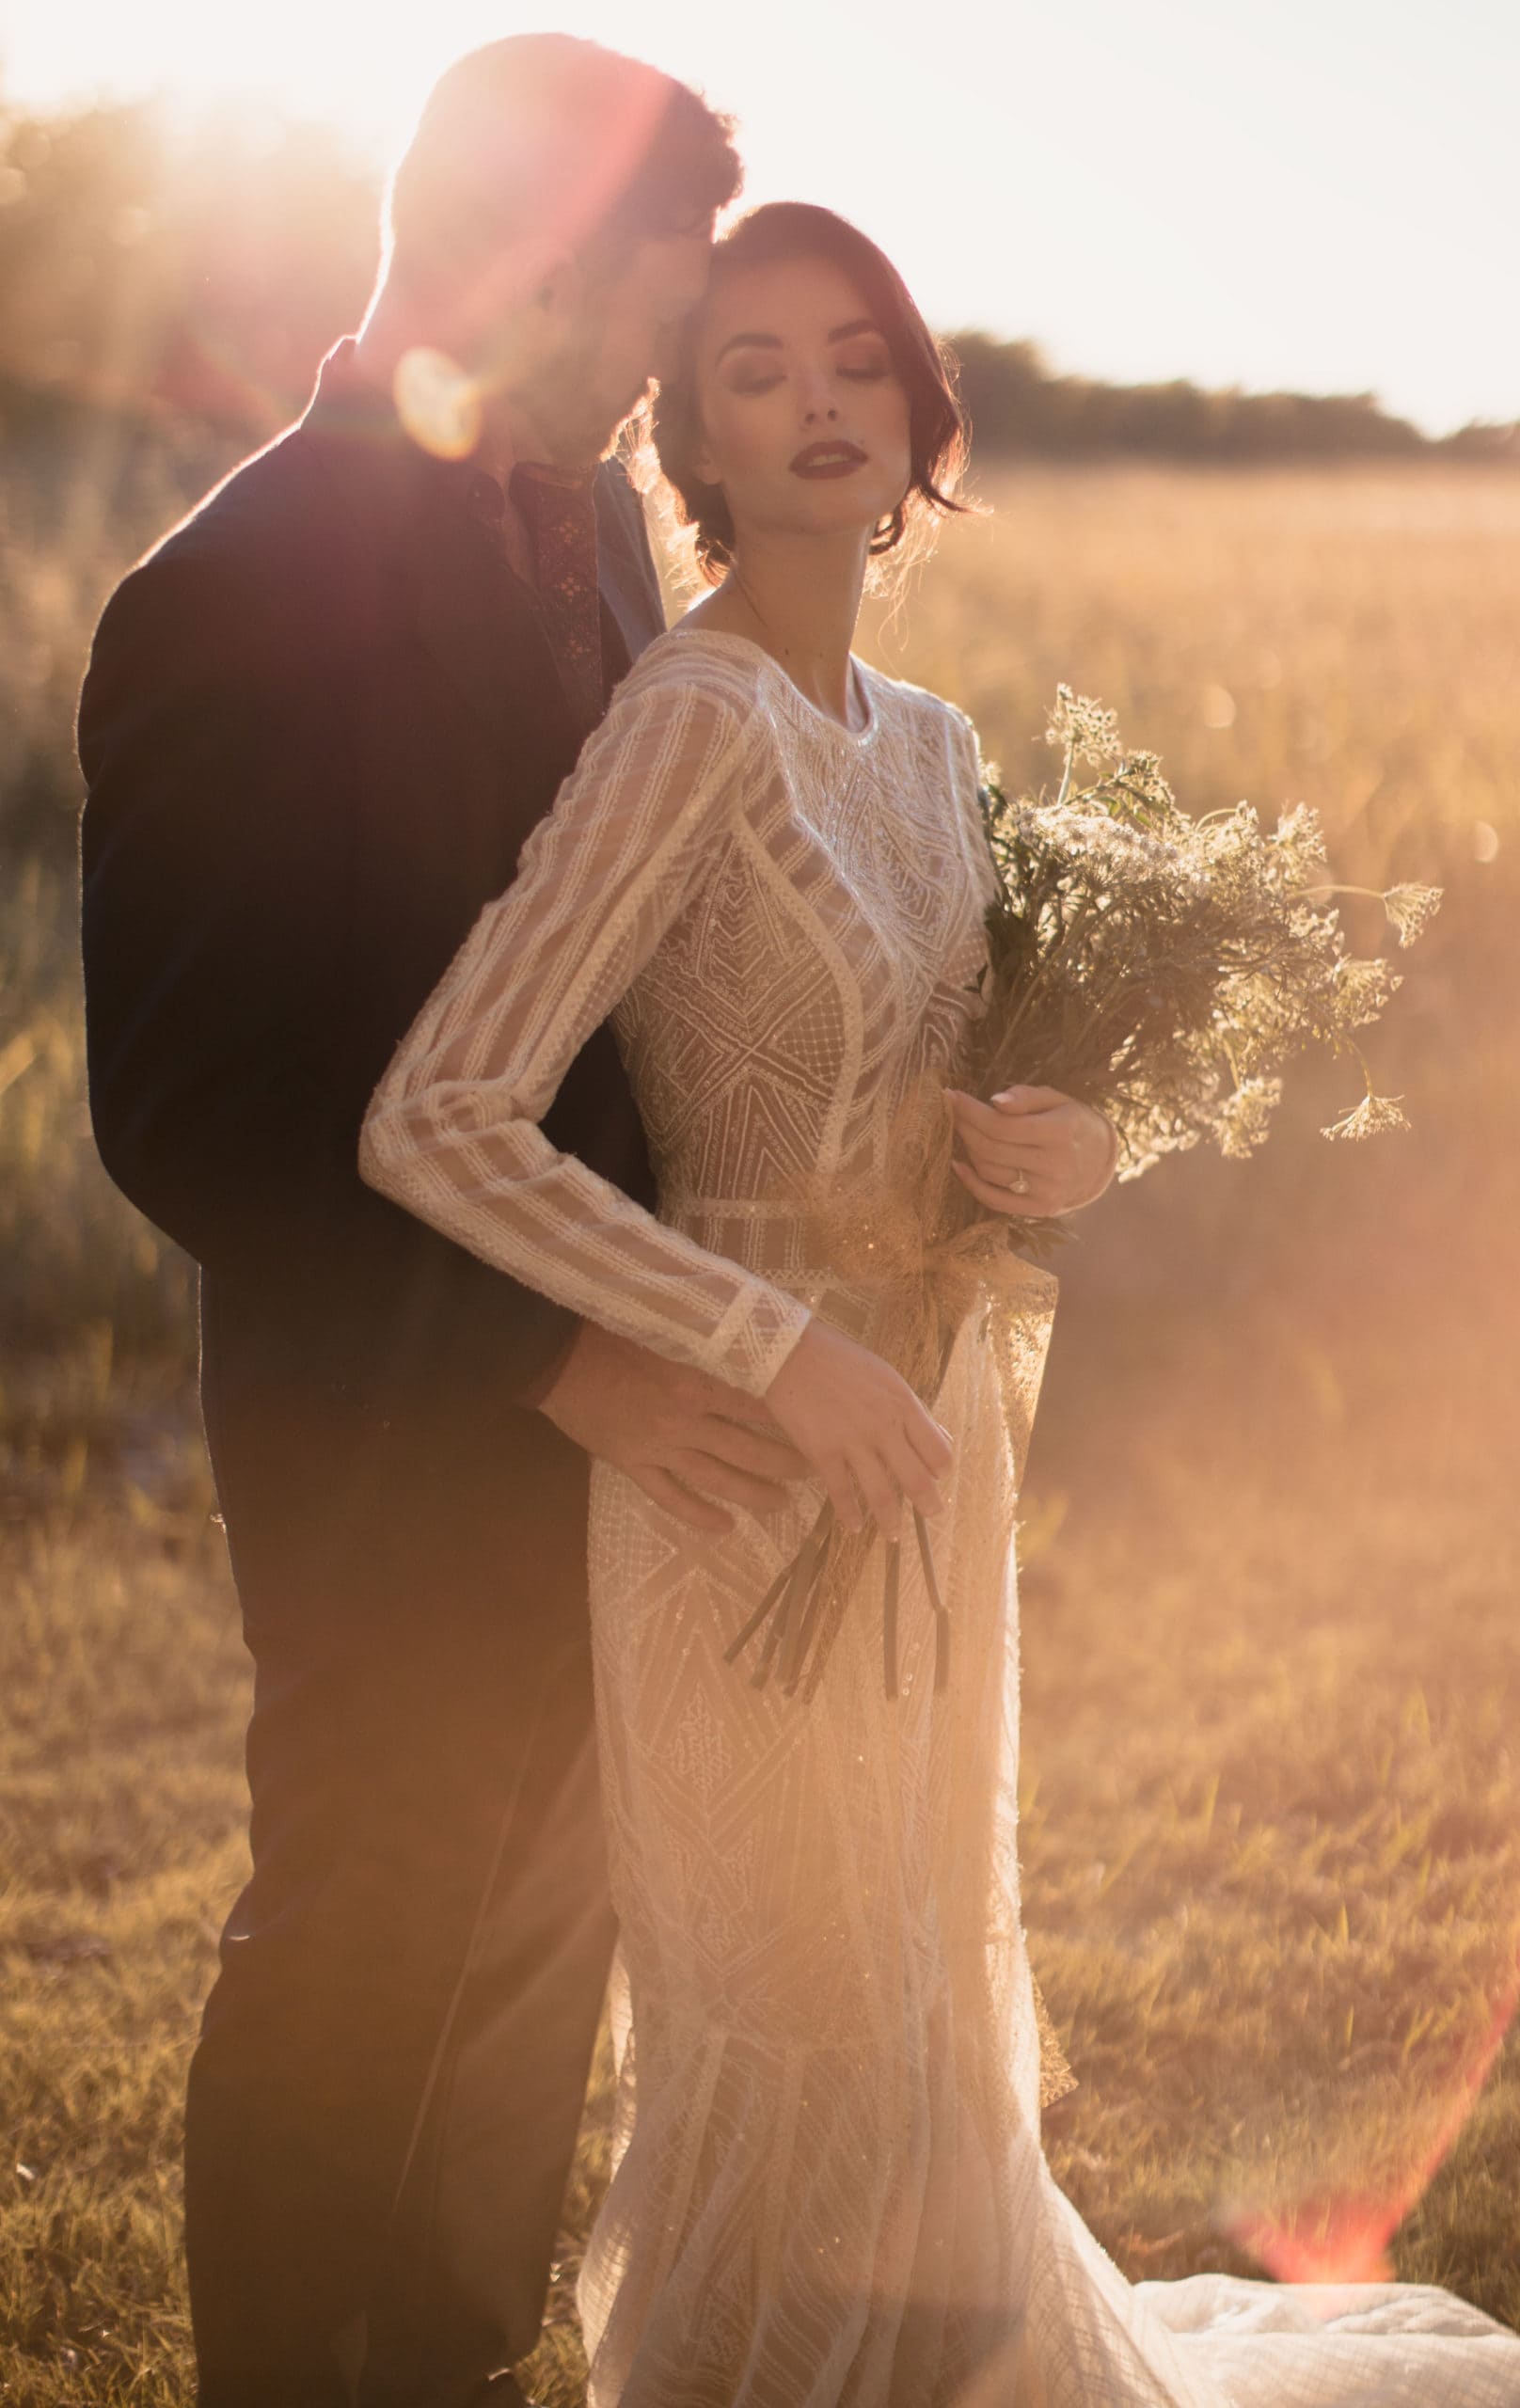 The best elopement photographers know how to pose.